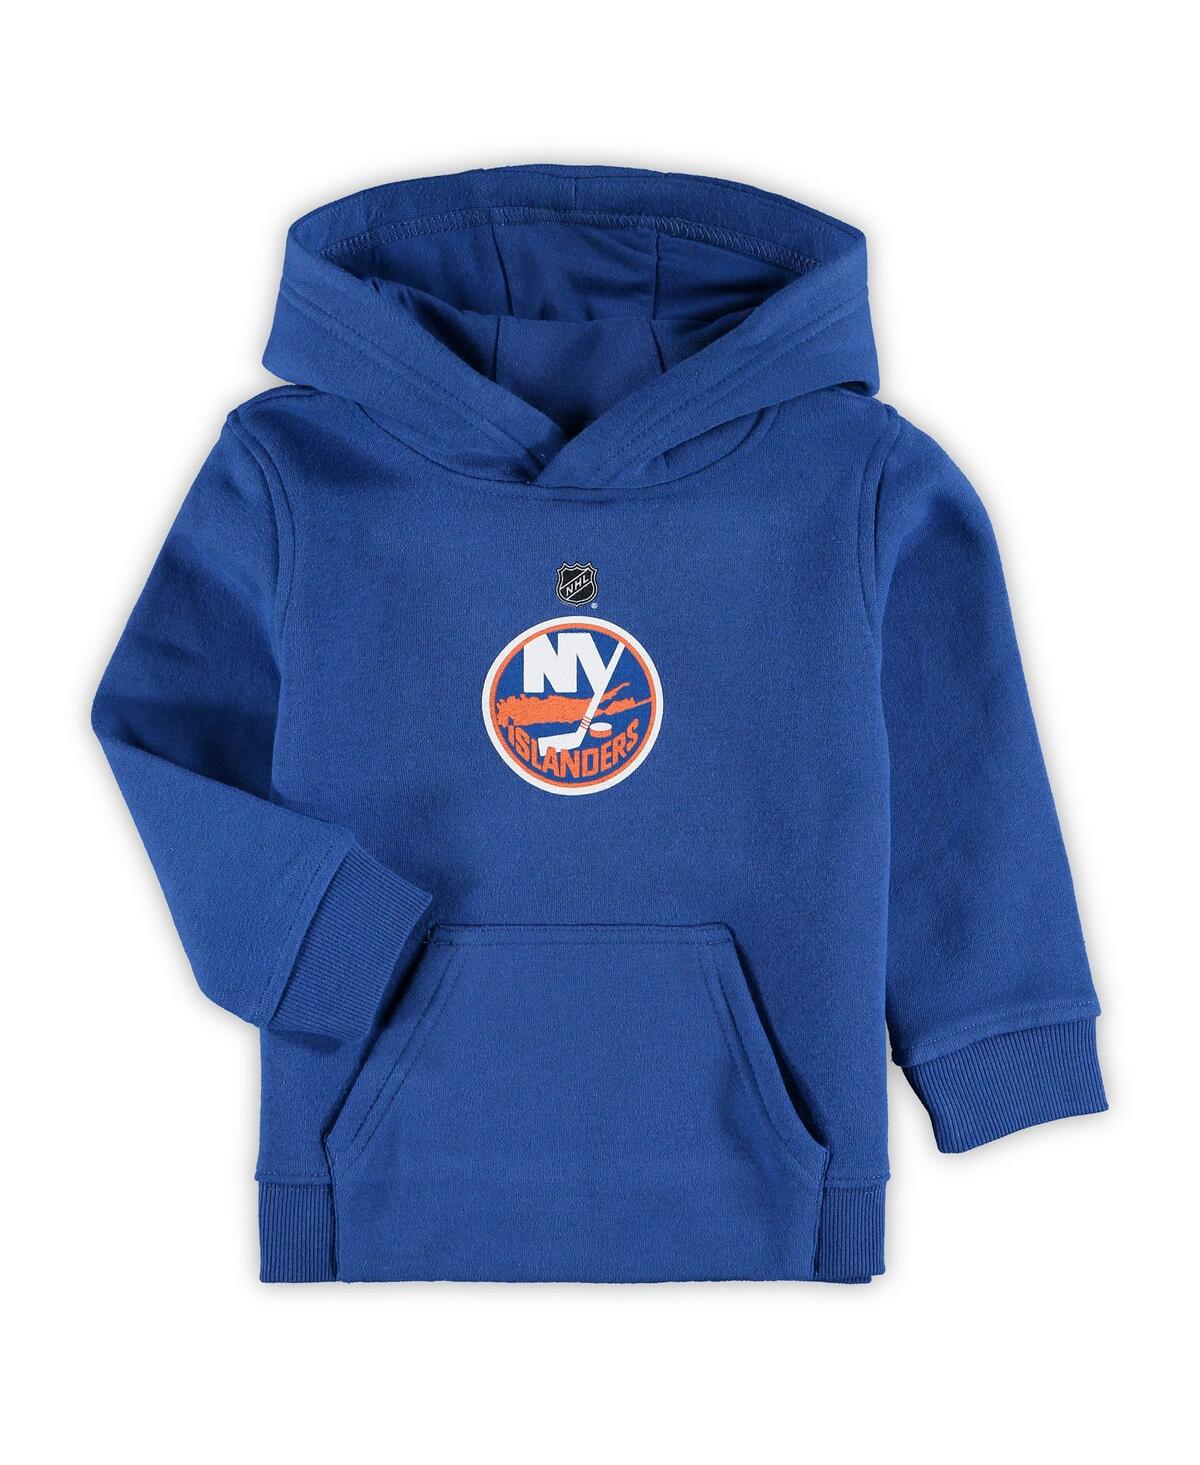 OUTERSTUFF TODDLER BOYS AND GIRLS ROYAL NEW YORK ISLANDERS PRIMARY LOGO PULLOVER HOODIE